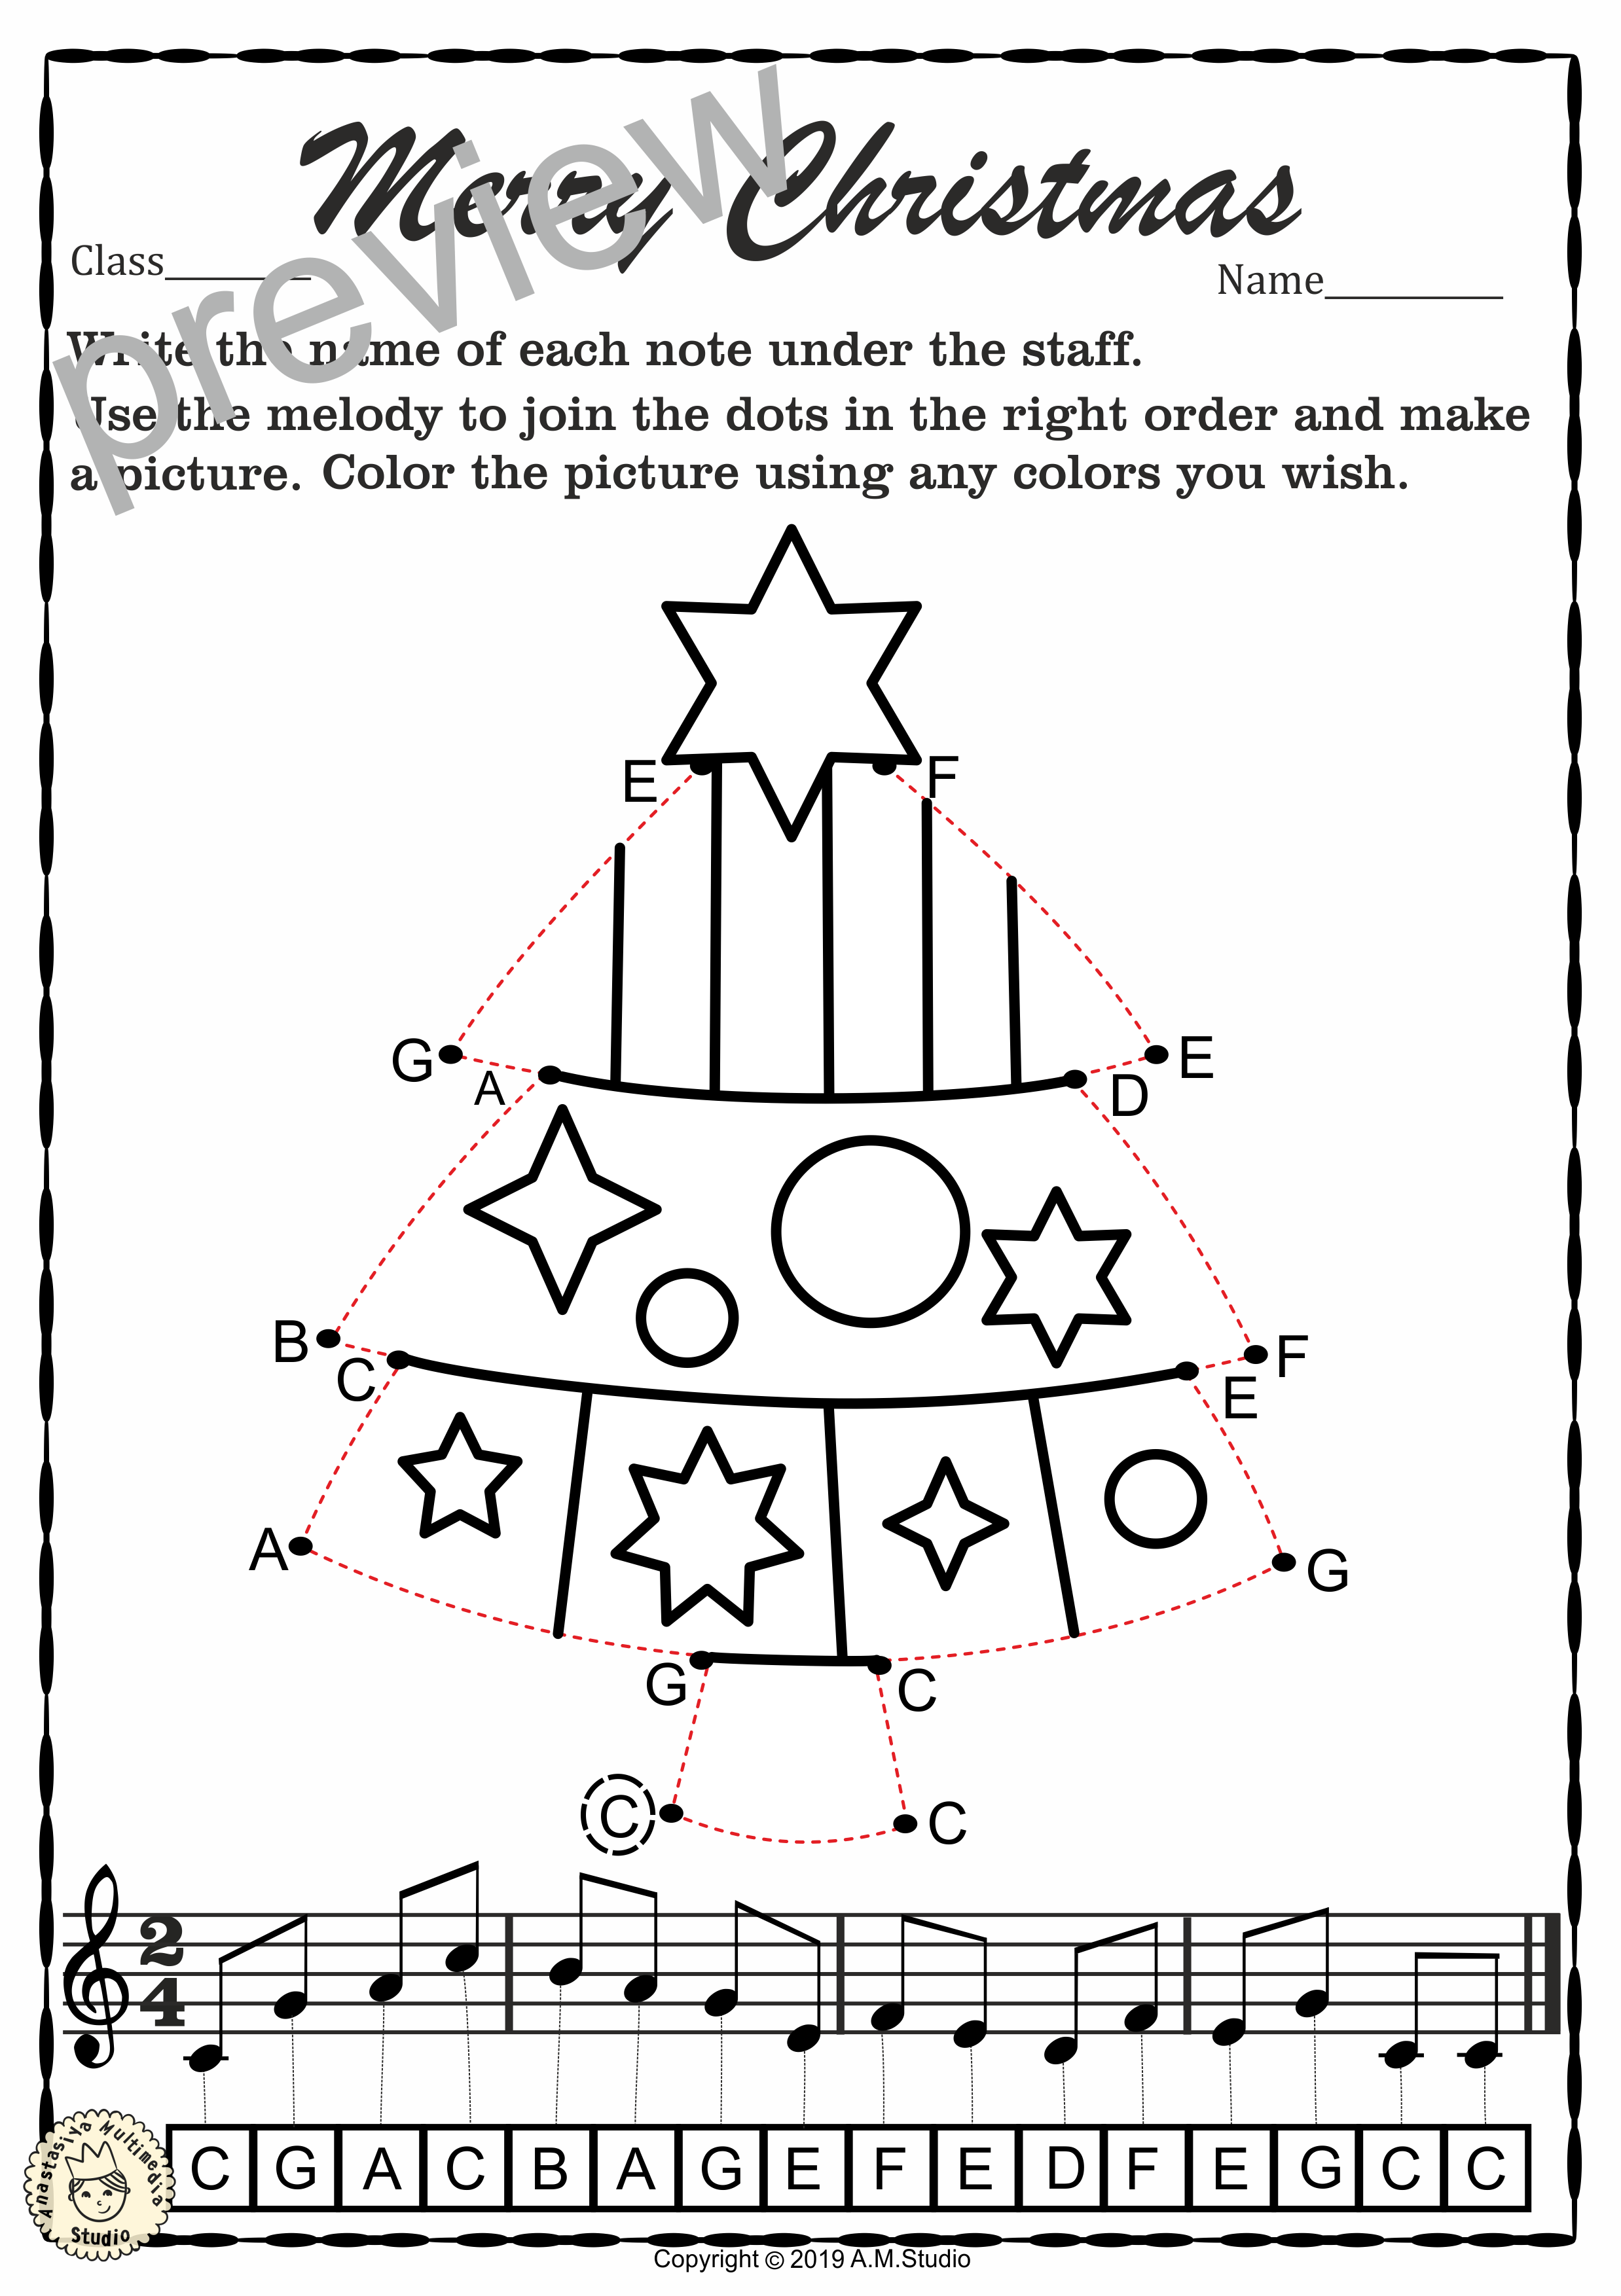 Christmas Dot to Dot Note Reading Worksheets {Treble Clef} with answers (img # 3)